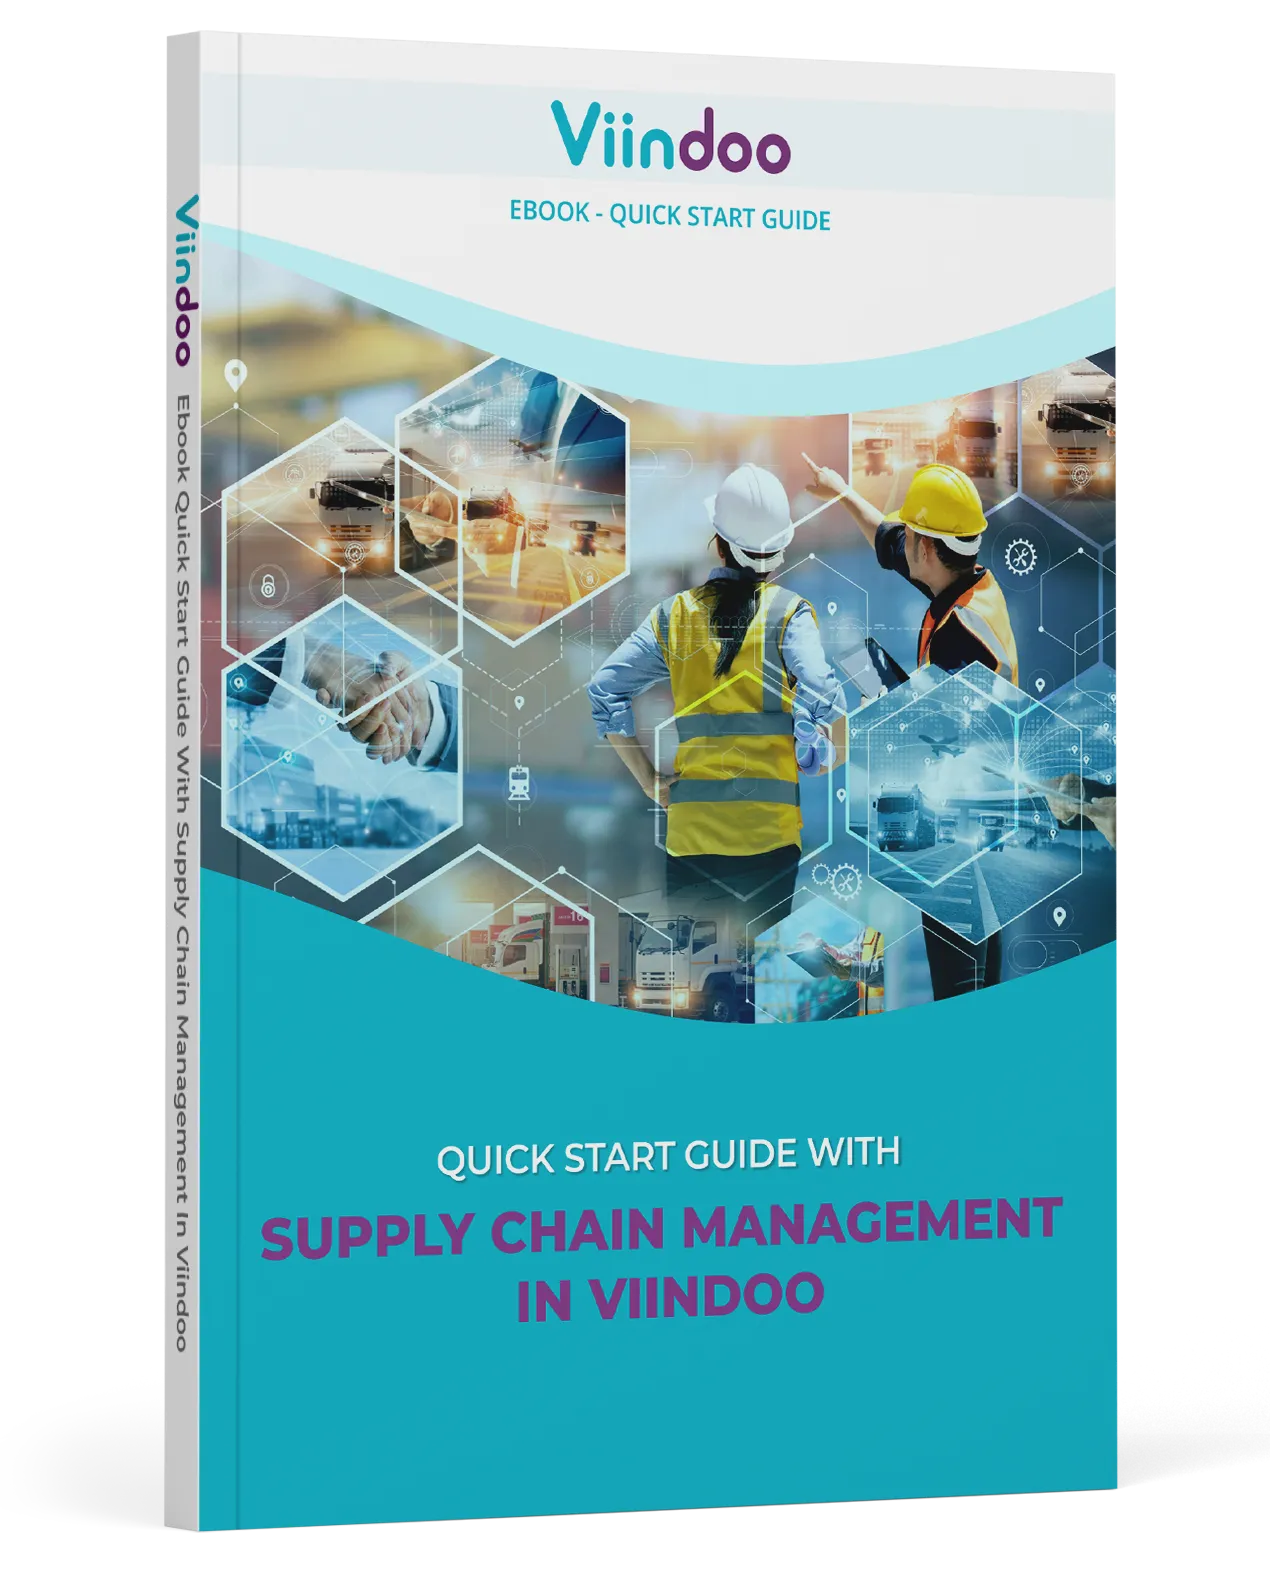 Quick Start Guide with Supply Chain Management in Viindoo